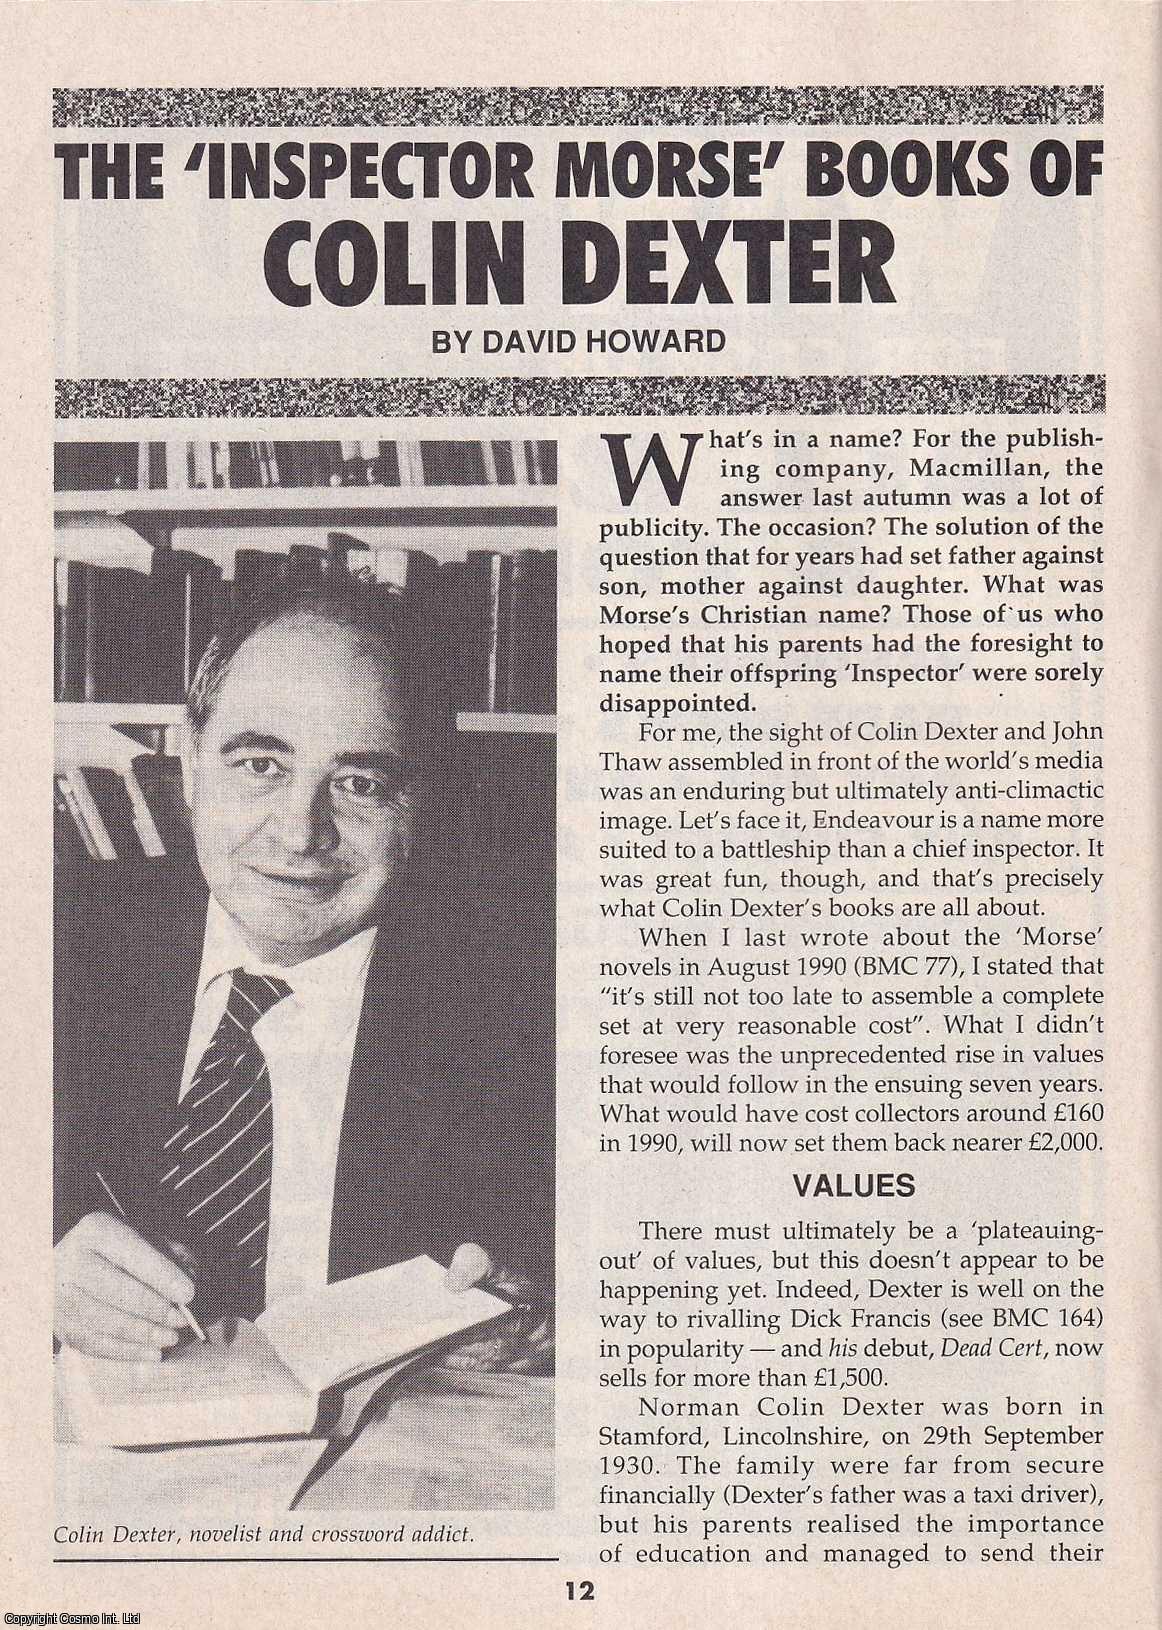 David Howard - Colin Dexter : The Inspector Morse Books. This is an original article separated from an issue of The Book & Magazine Collector publication, 1997.